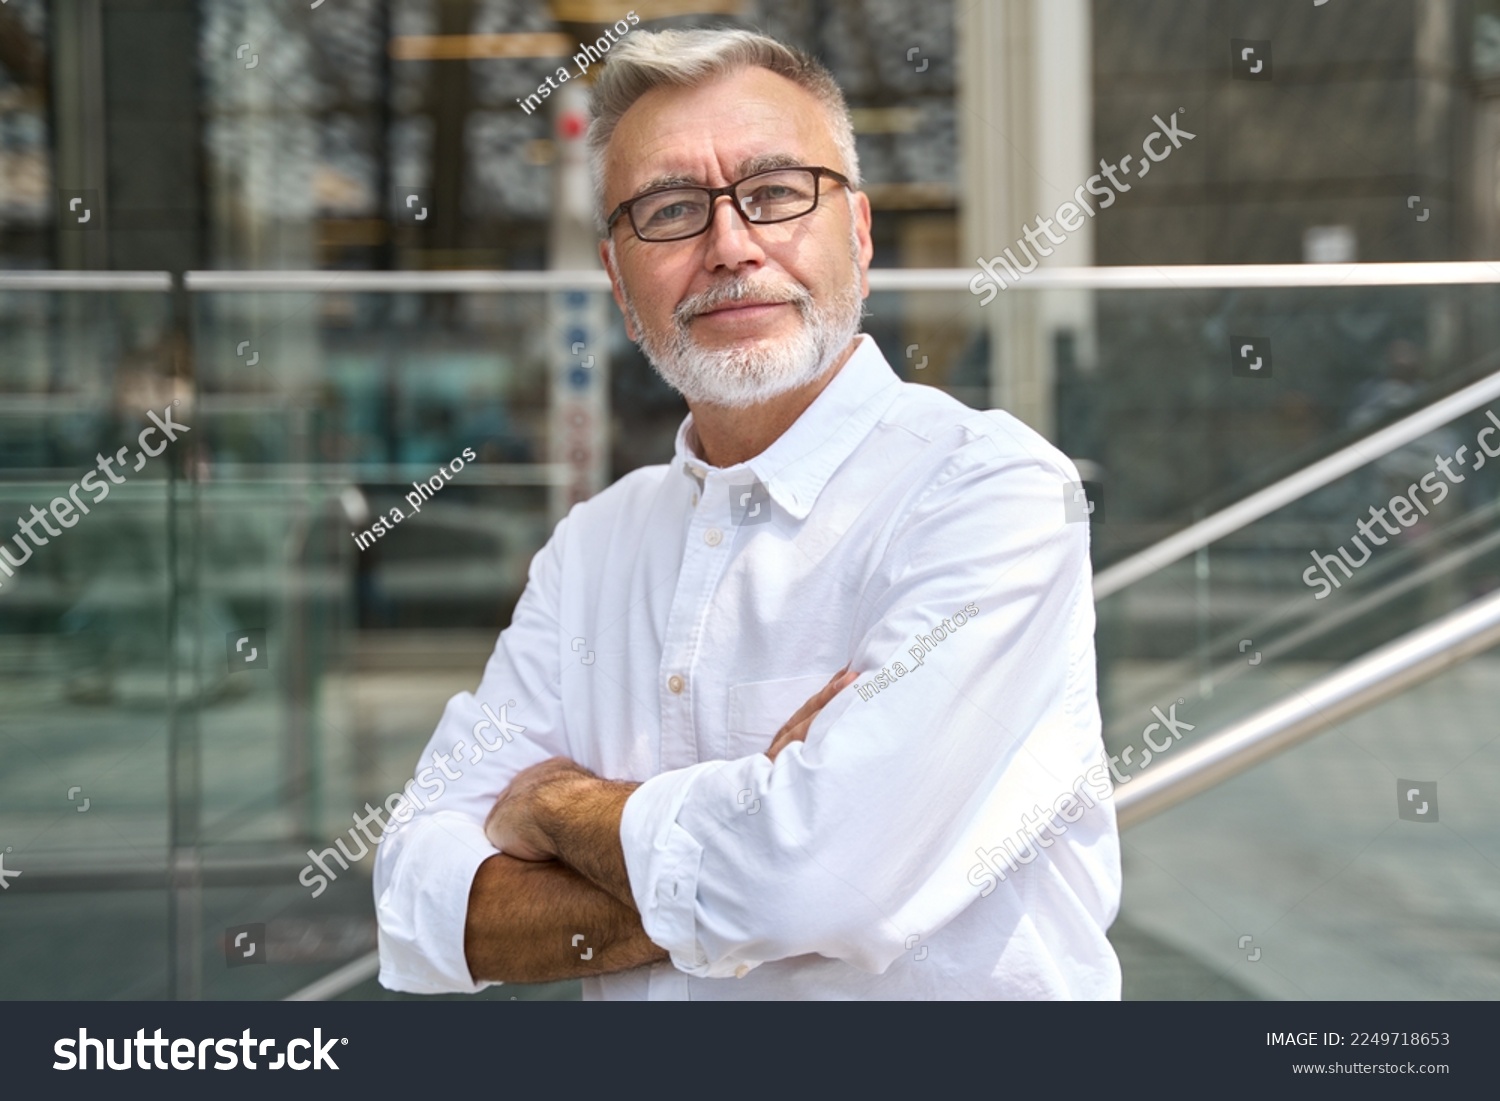 Confident happy mature older business man leader, smiling middle aged senior old professional businessman wearing white shirt glasses crossed arms looking at camera standing outside, portrait. #2249718653